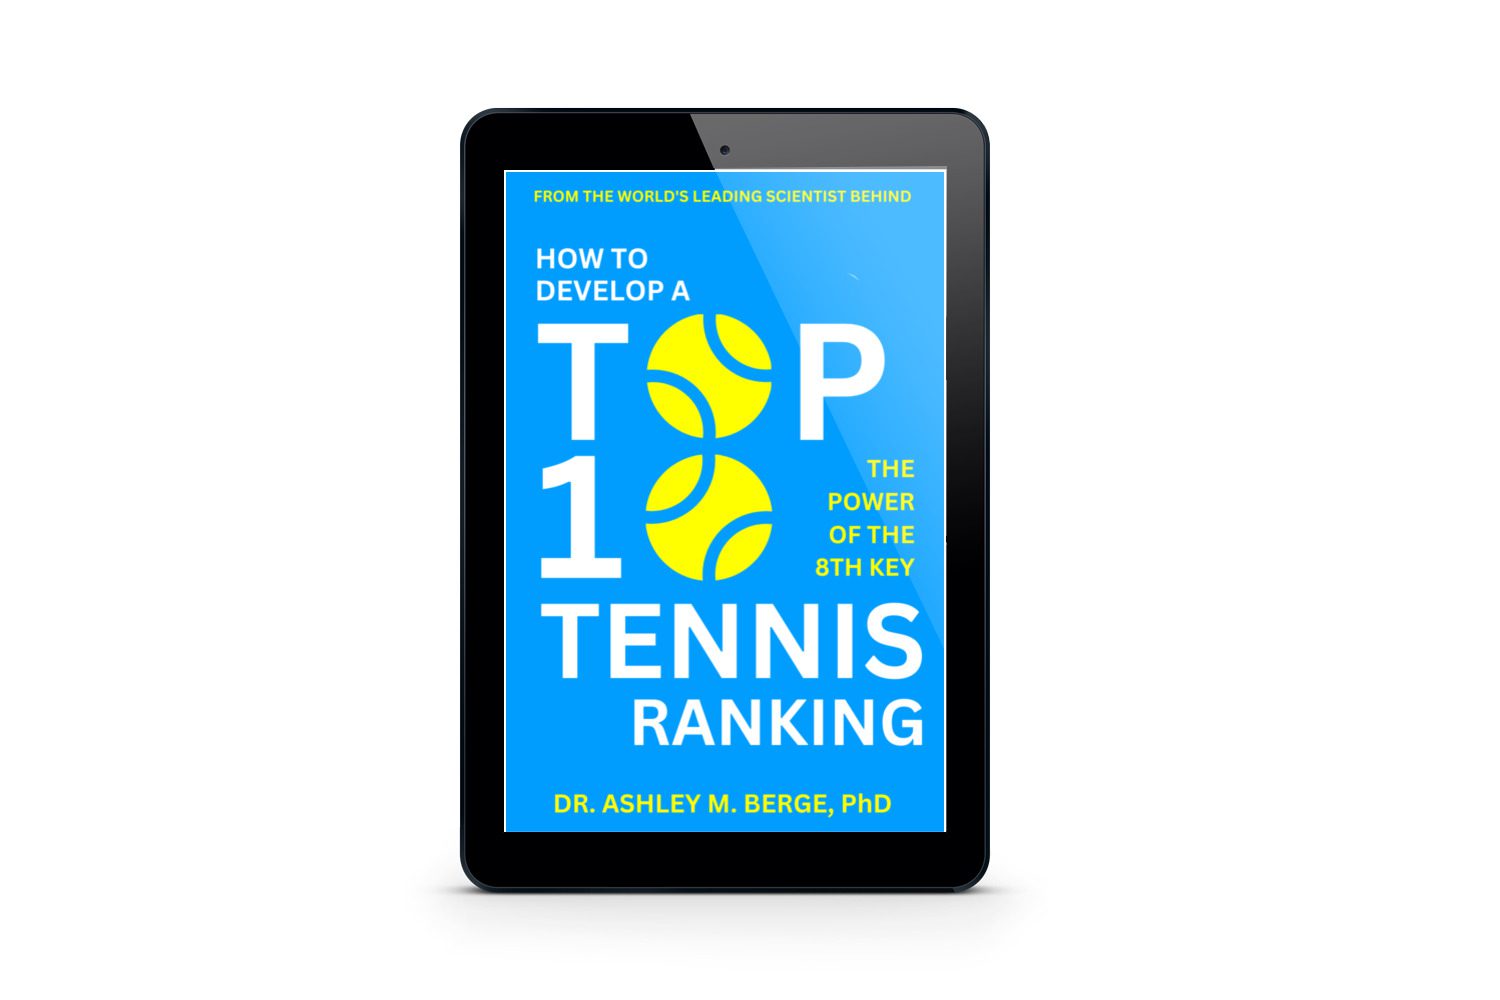 How to Develop a <a href="https://am8international.com/product/rrp-how-to-develop-a-top-10-tennis-ranking-download-only/" data-type="product" data-id="19531">Top 10</a> Tennis Ranking